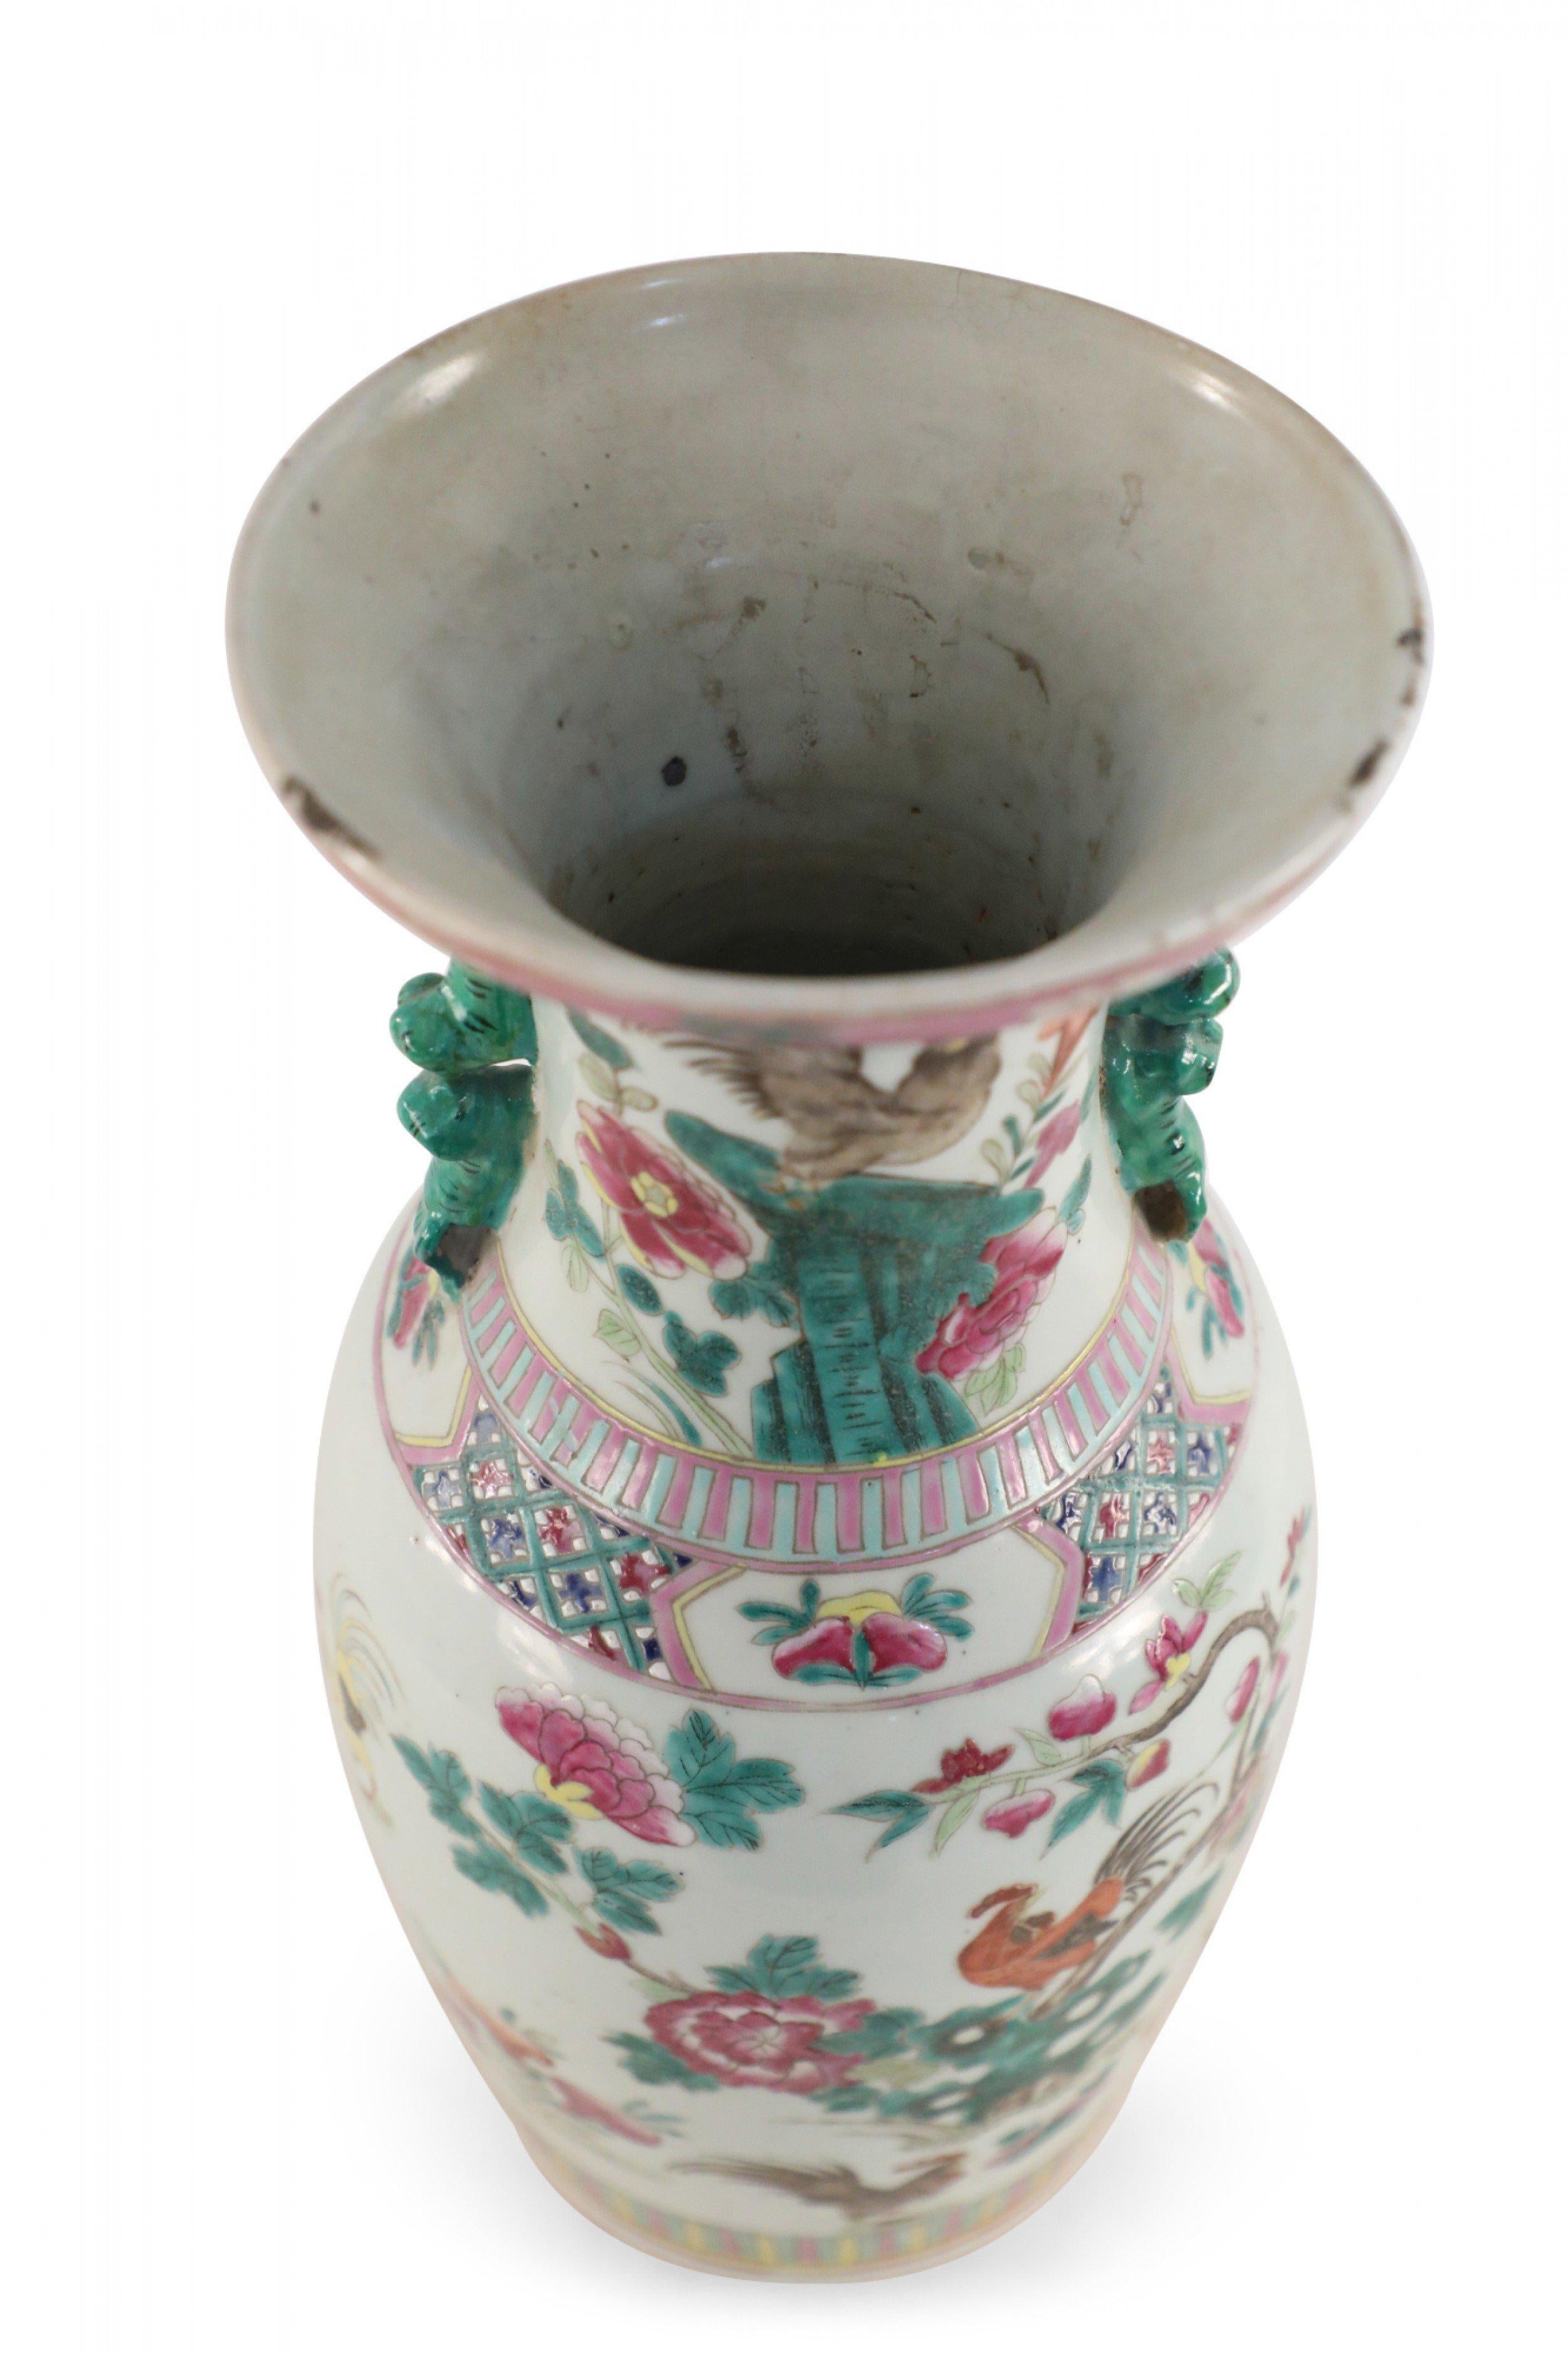 Chinese White, Green, and Pink Floral and Rooster Design Porcelain Urn For Sale 4